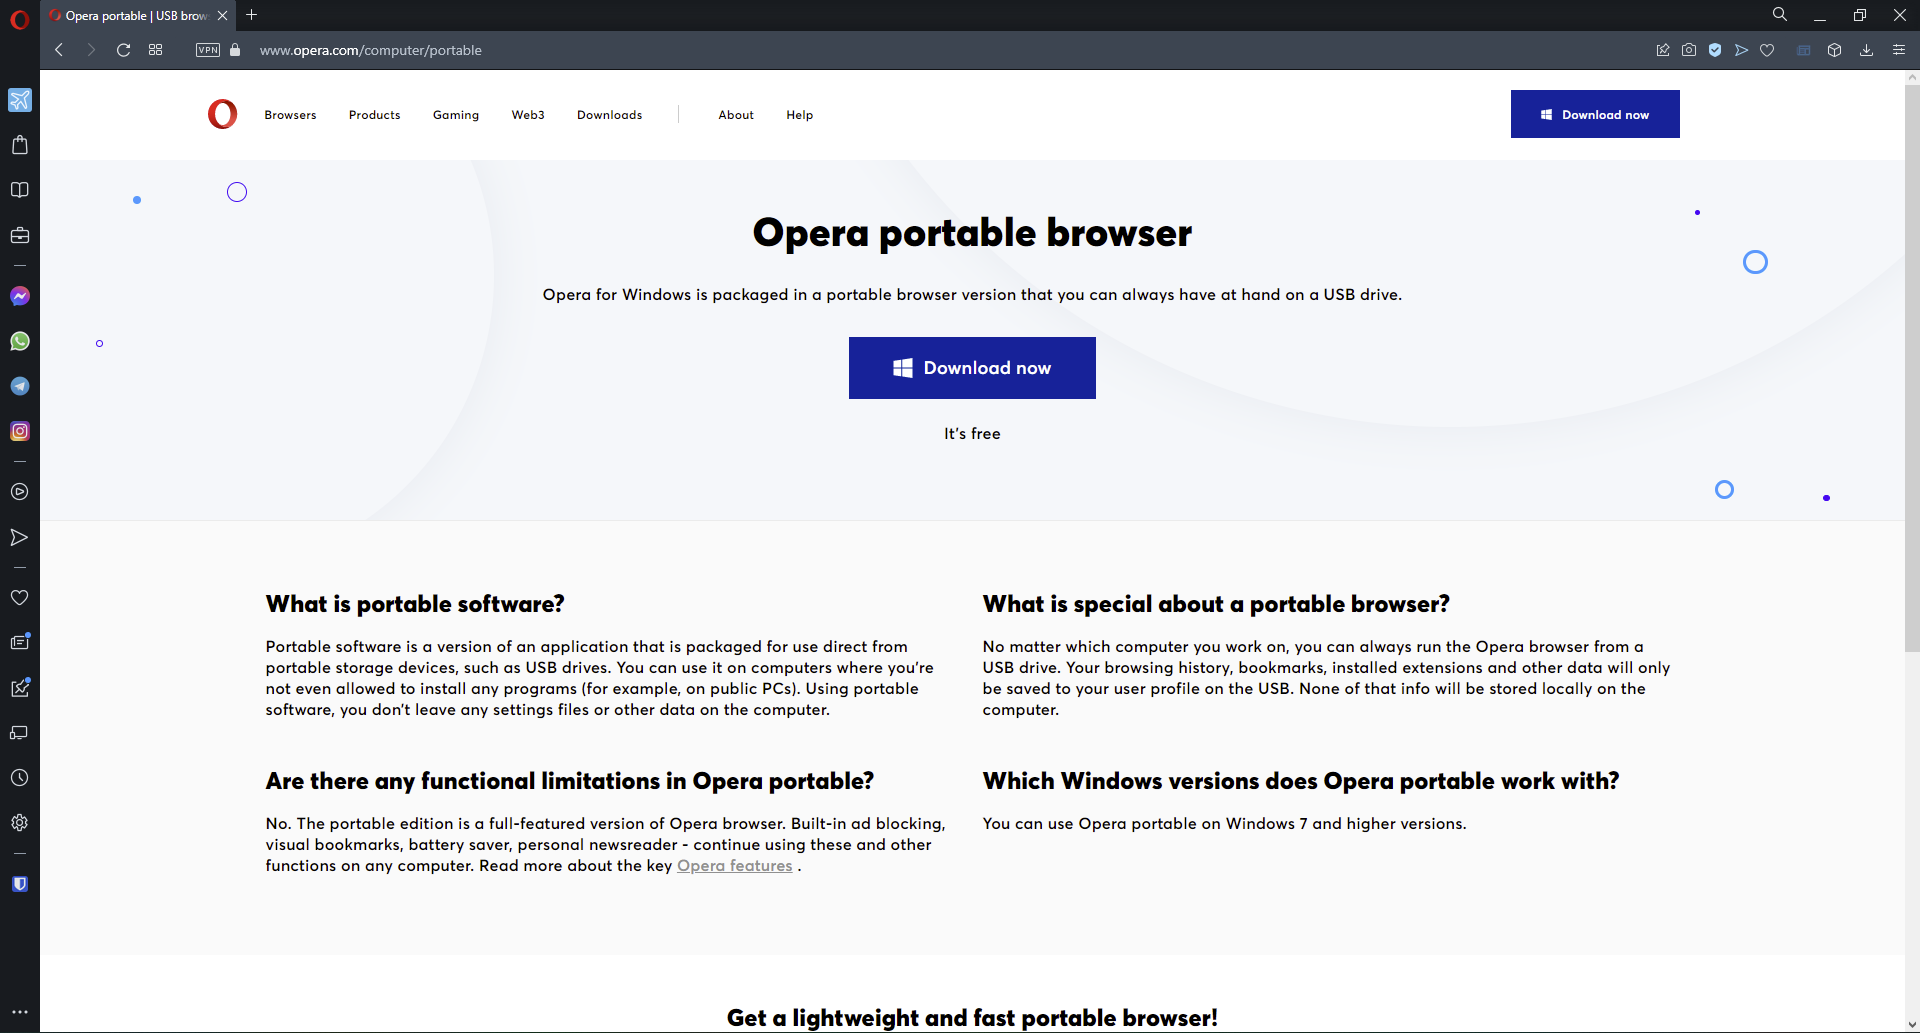 Opera portable browser for Windows 7.